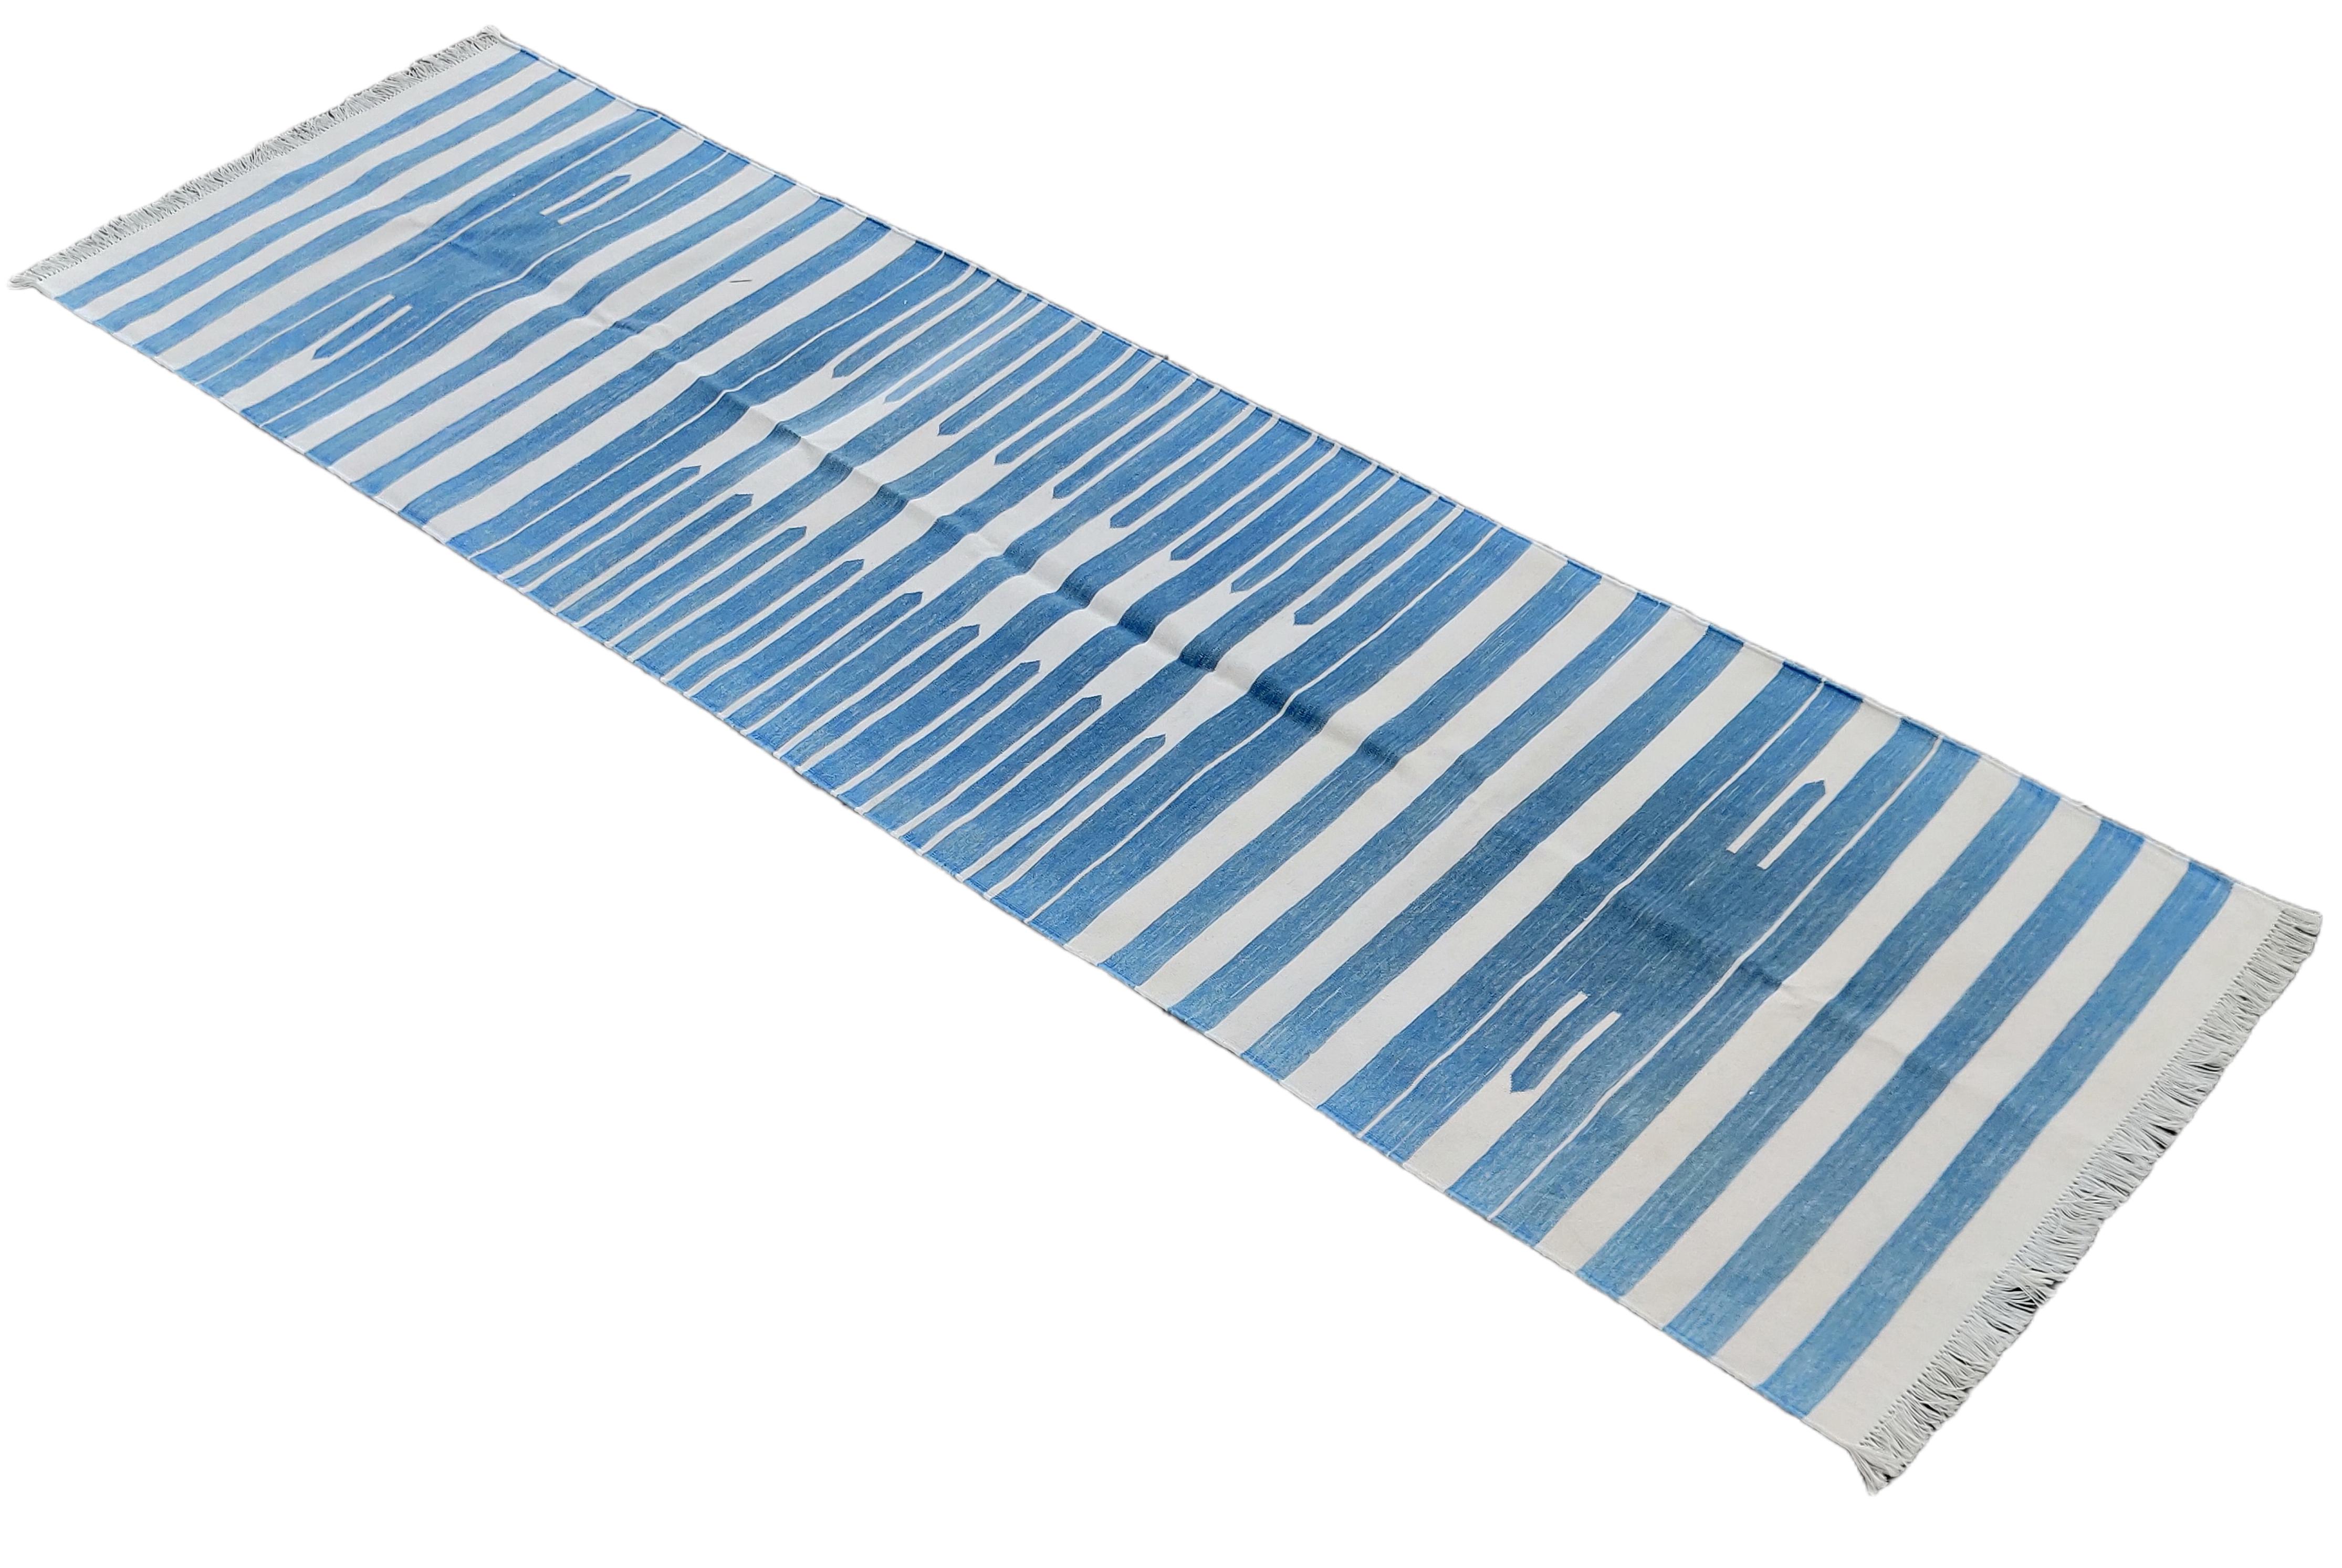 Cotton Natural Vegetable Dyed, Blue And White Striped Indian Dhurrie Runner-3'x12'
These special flat-weave dhurries are hand-woven with 15 ply 100% cotton yarn. Due to the special manufacturing techniques used to create our rugs, the size and color